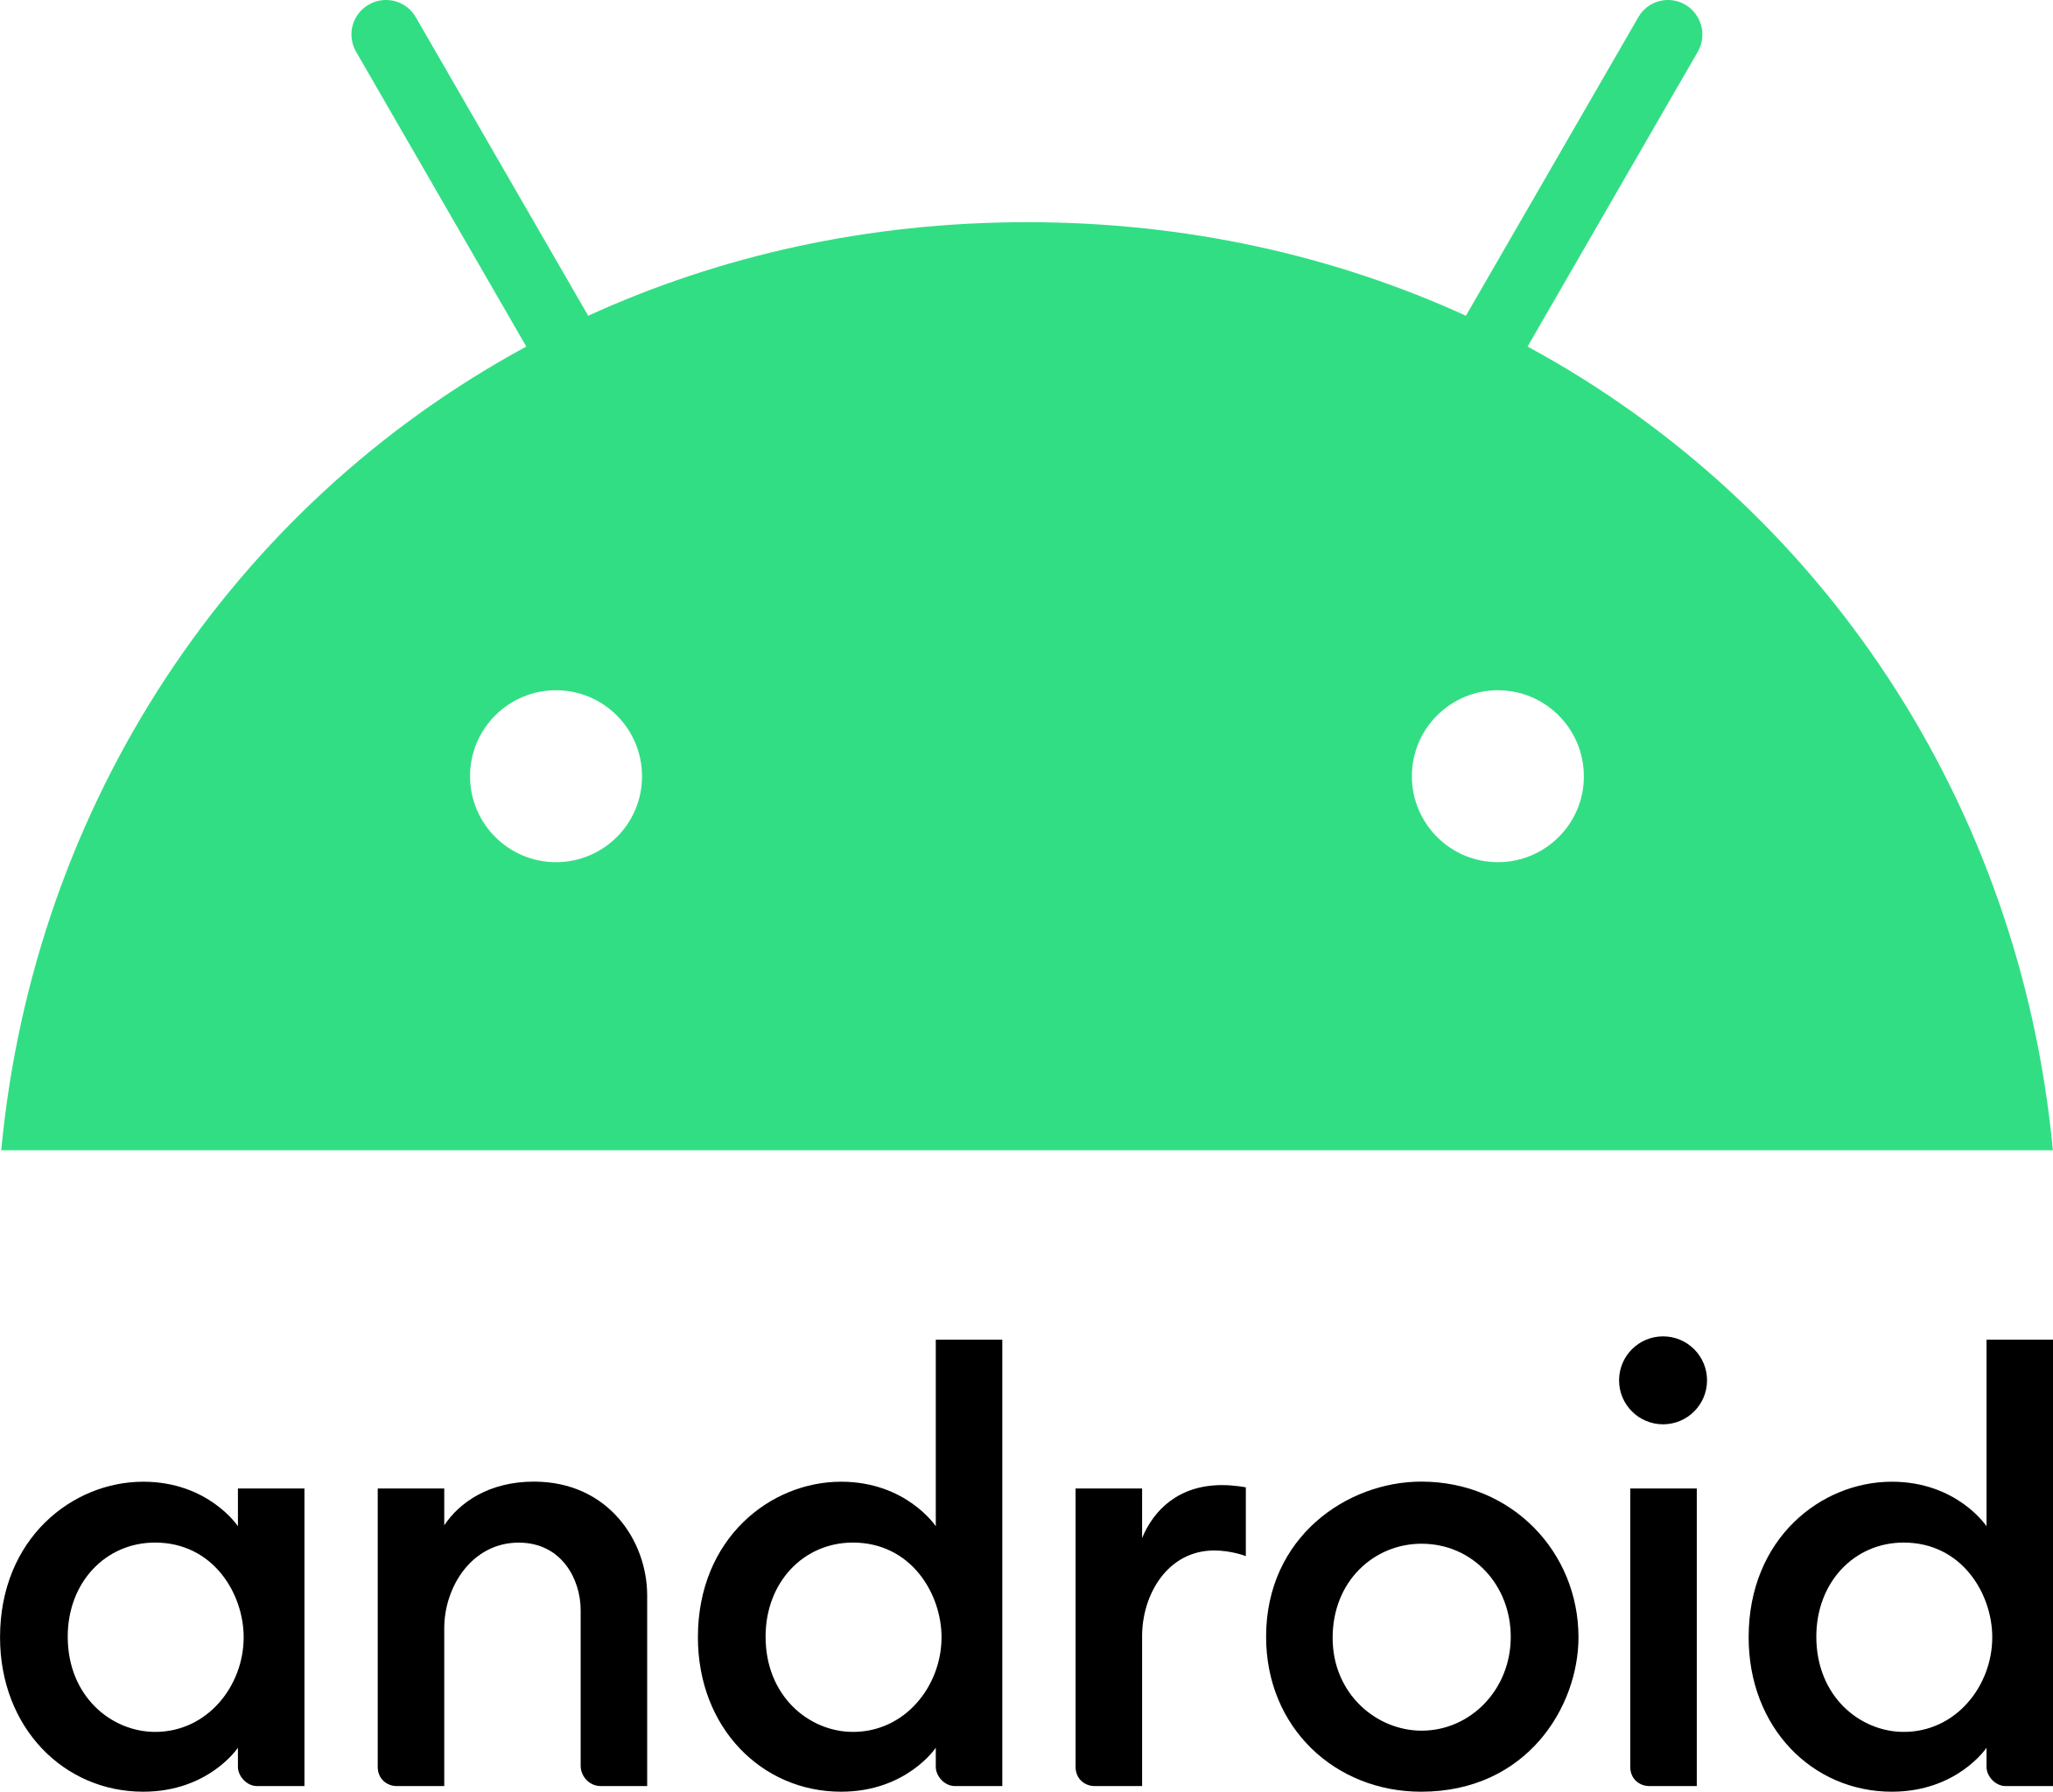 Android_logo_2019_(stacked).svg